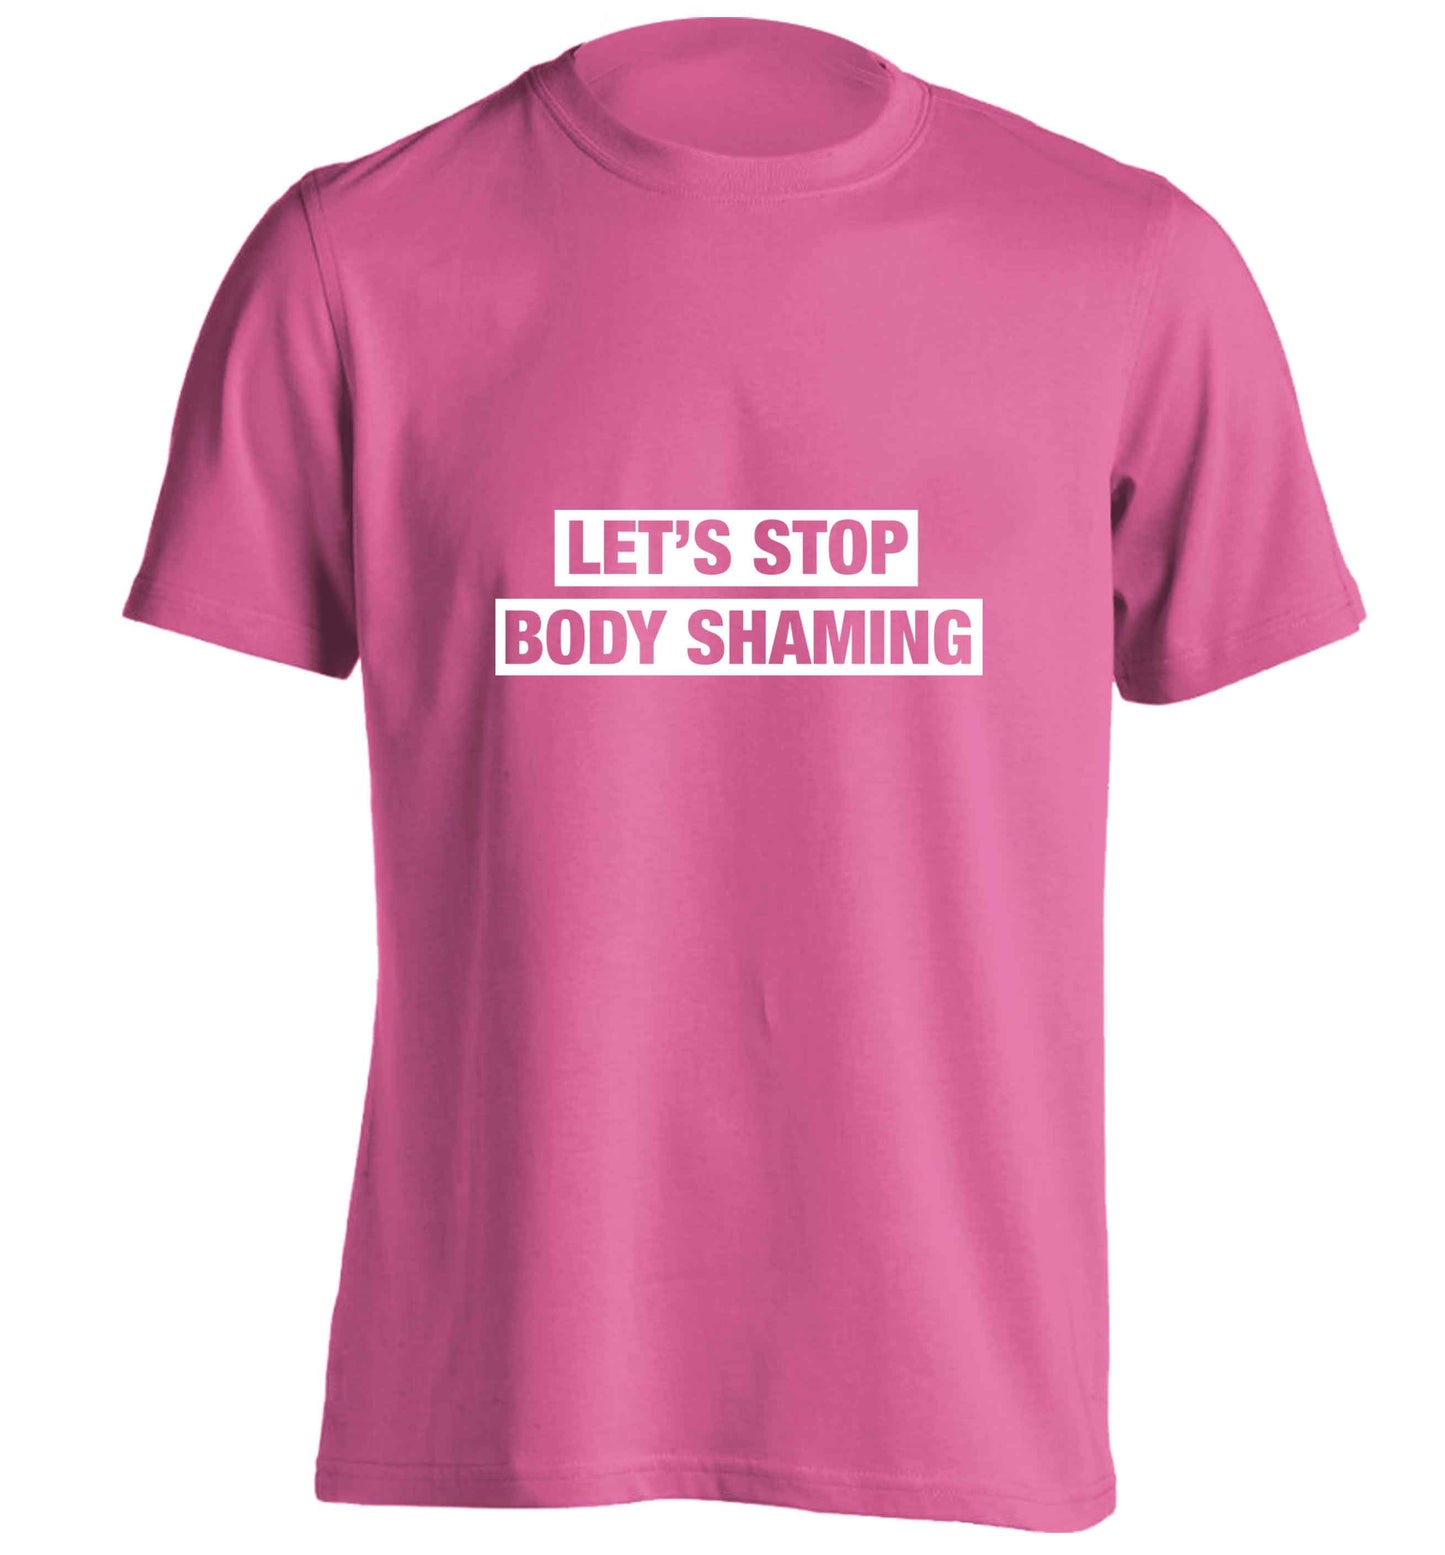 Let's stop body shaming adults unisex pink Tshirt 2XL